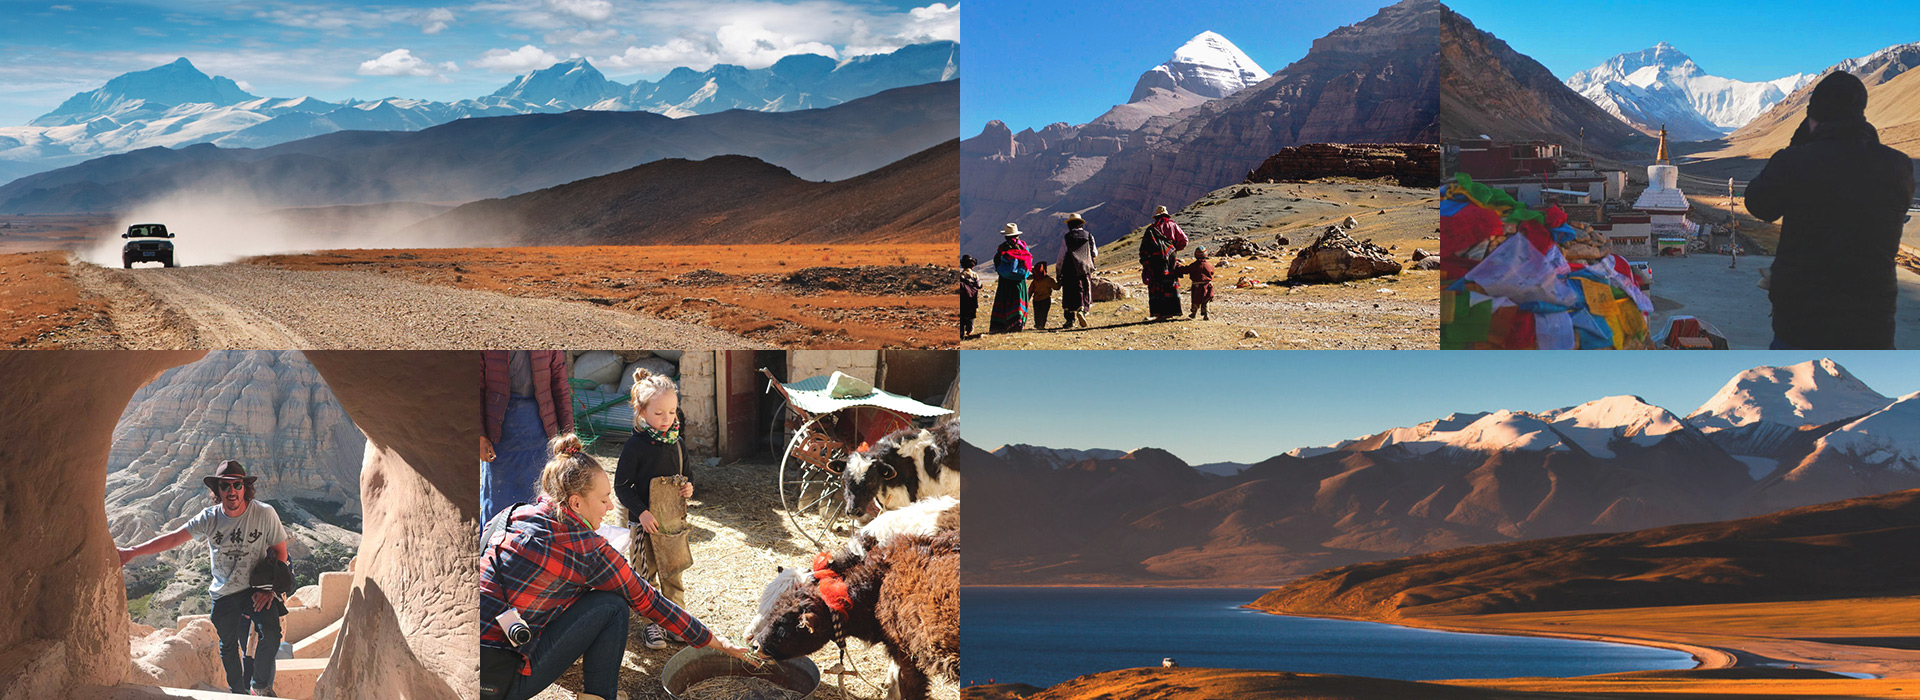 Revisit Tibet for New Discoveries